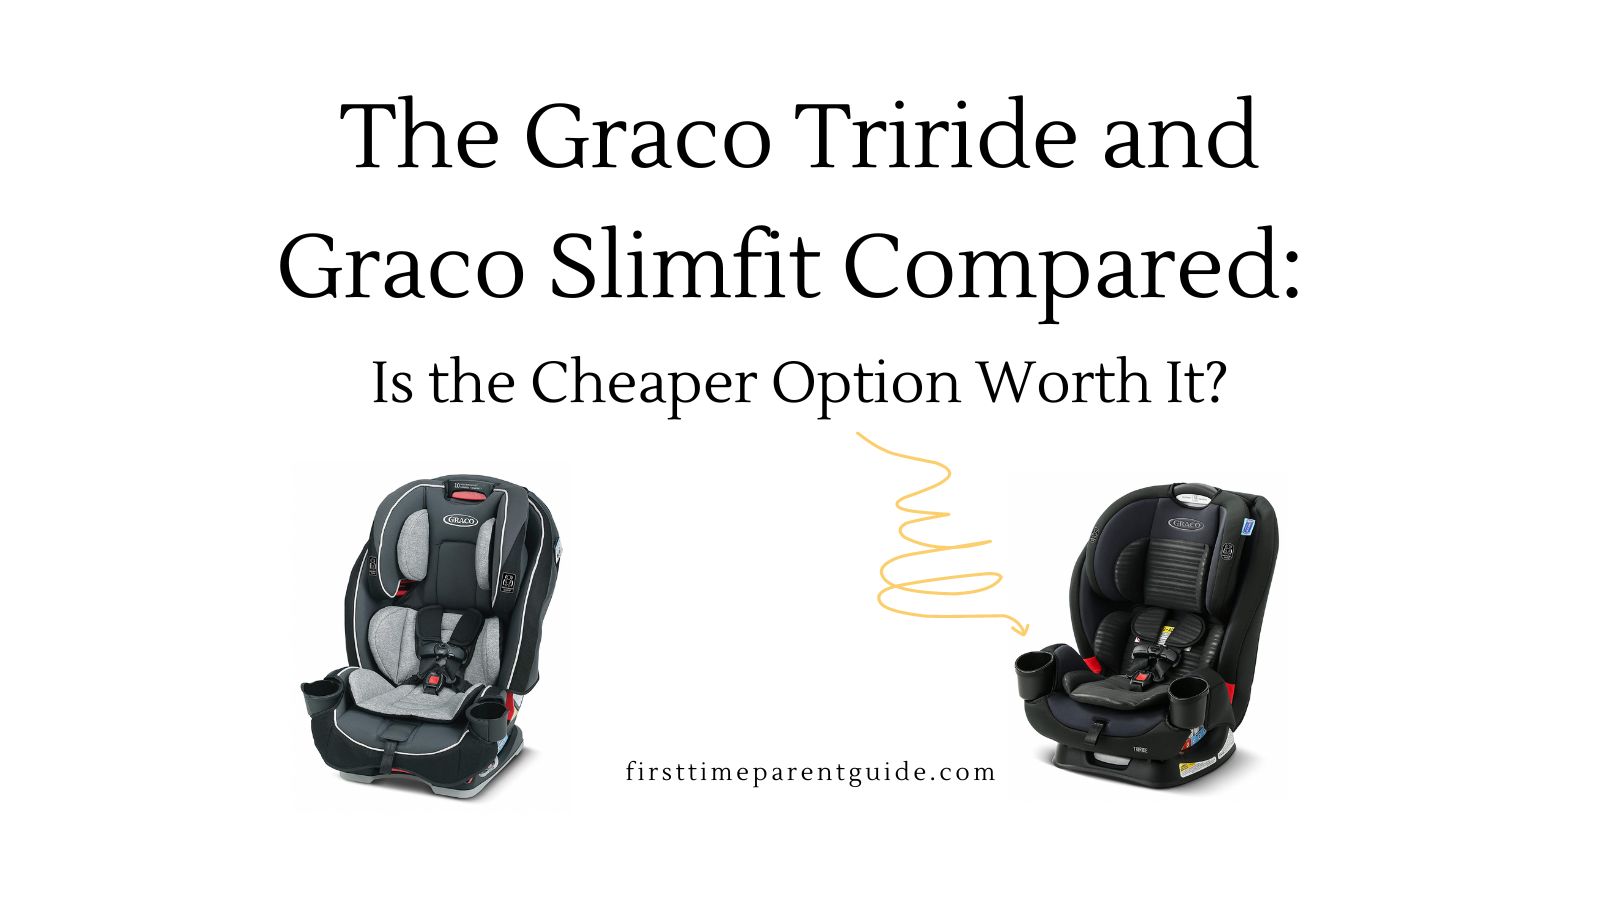 The Graco Triride and